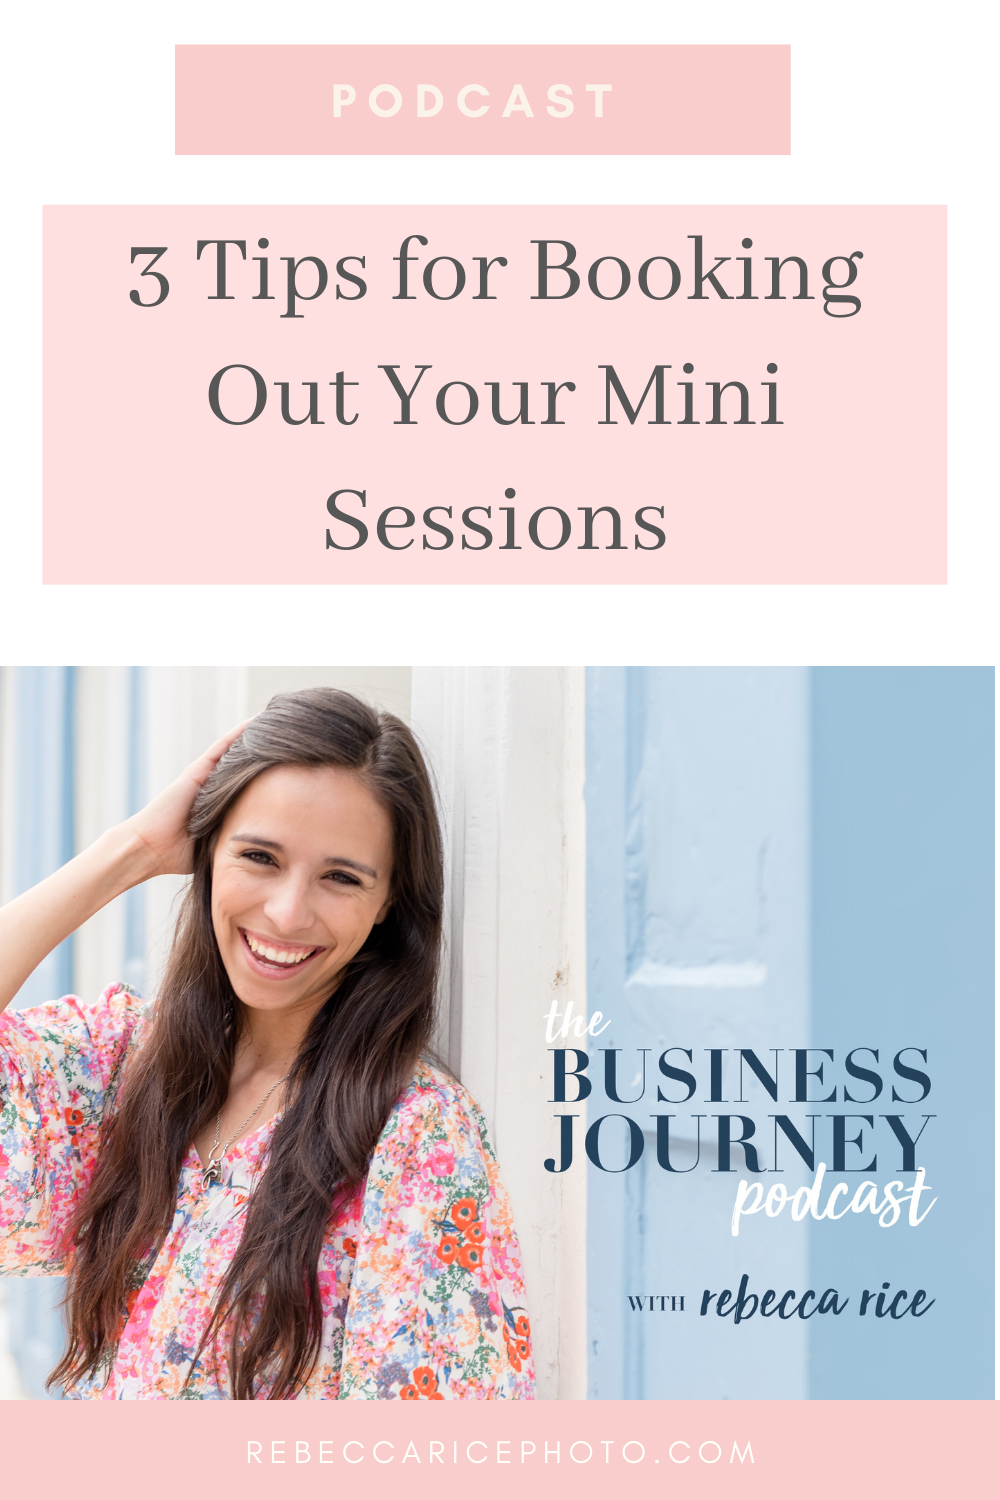 3 Tips for Booking Out Your Mini Sessions